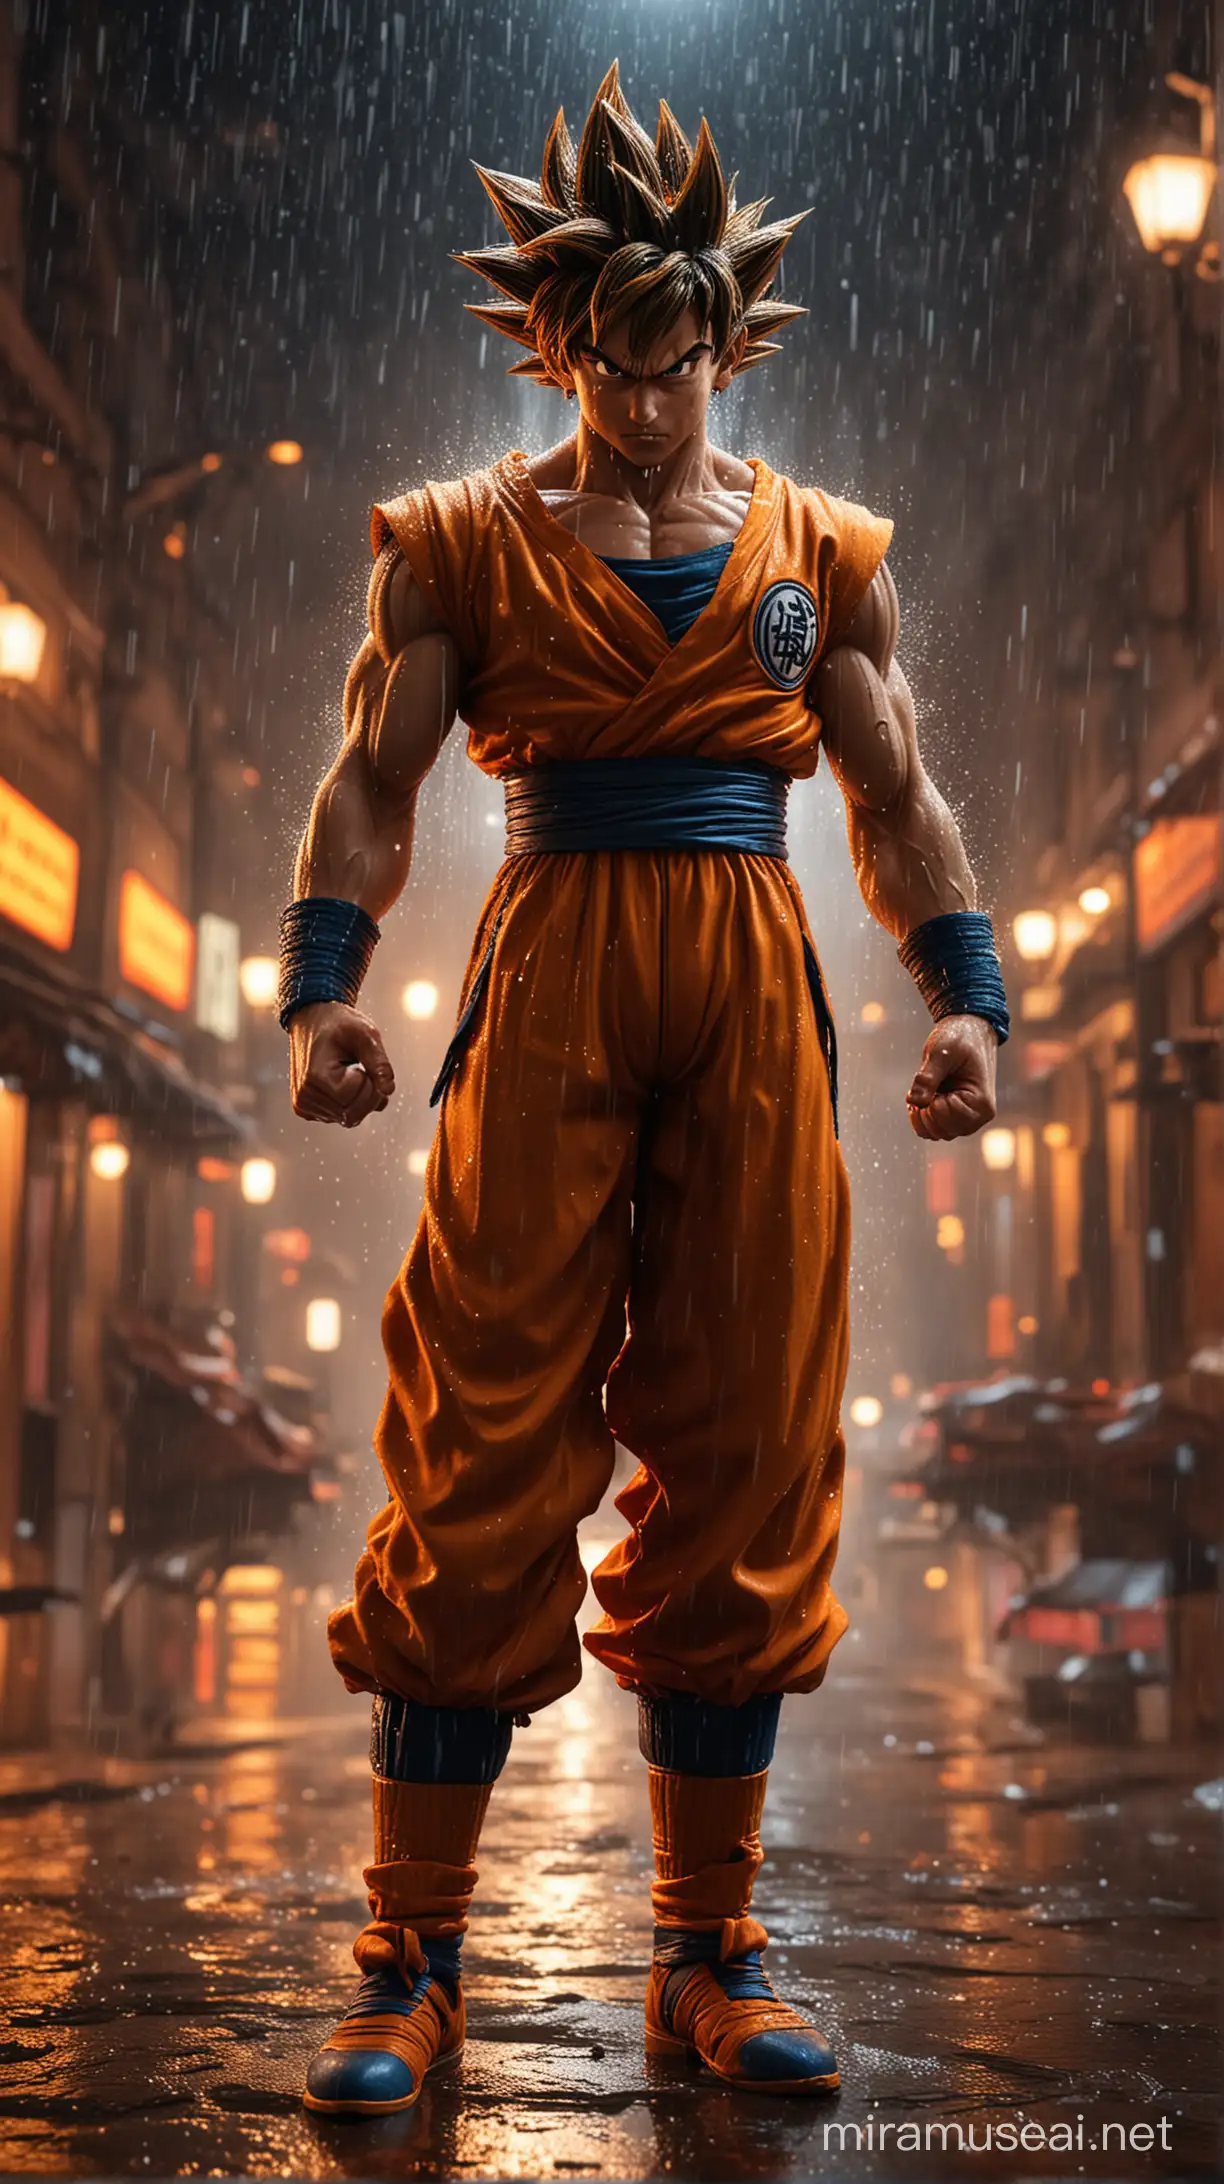 Goku in battle pose ,darkness Electronic, Photo realistic,blur orange bokeh background,rainy  night in a dark city, cinematic, HDR.close up view